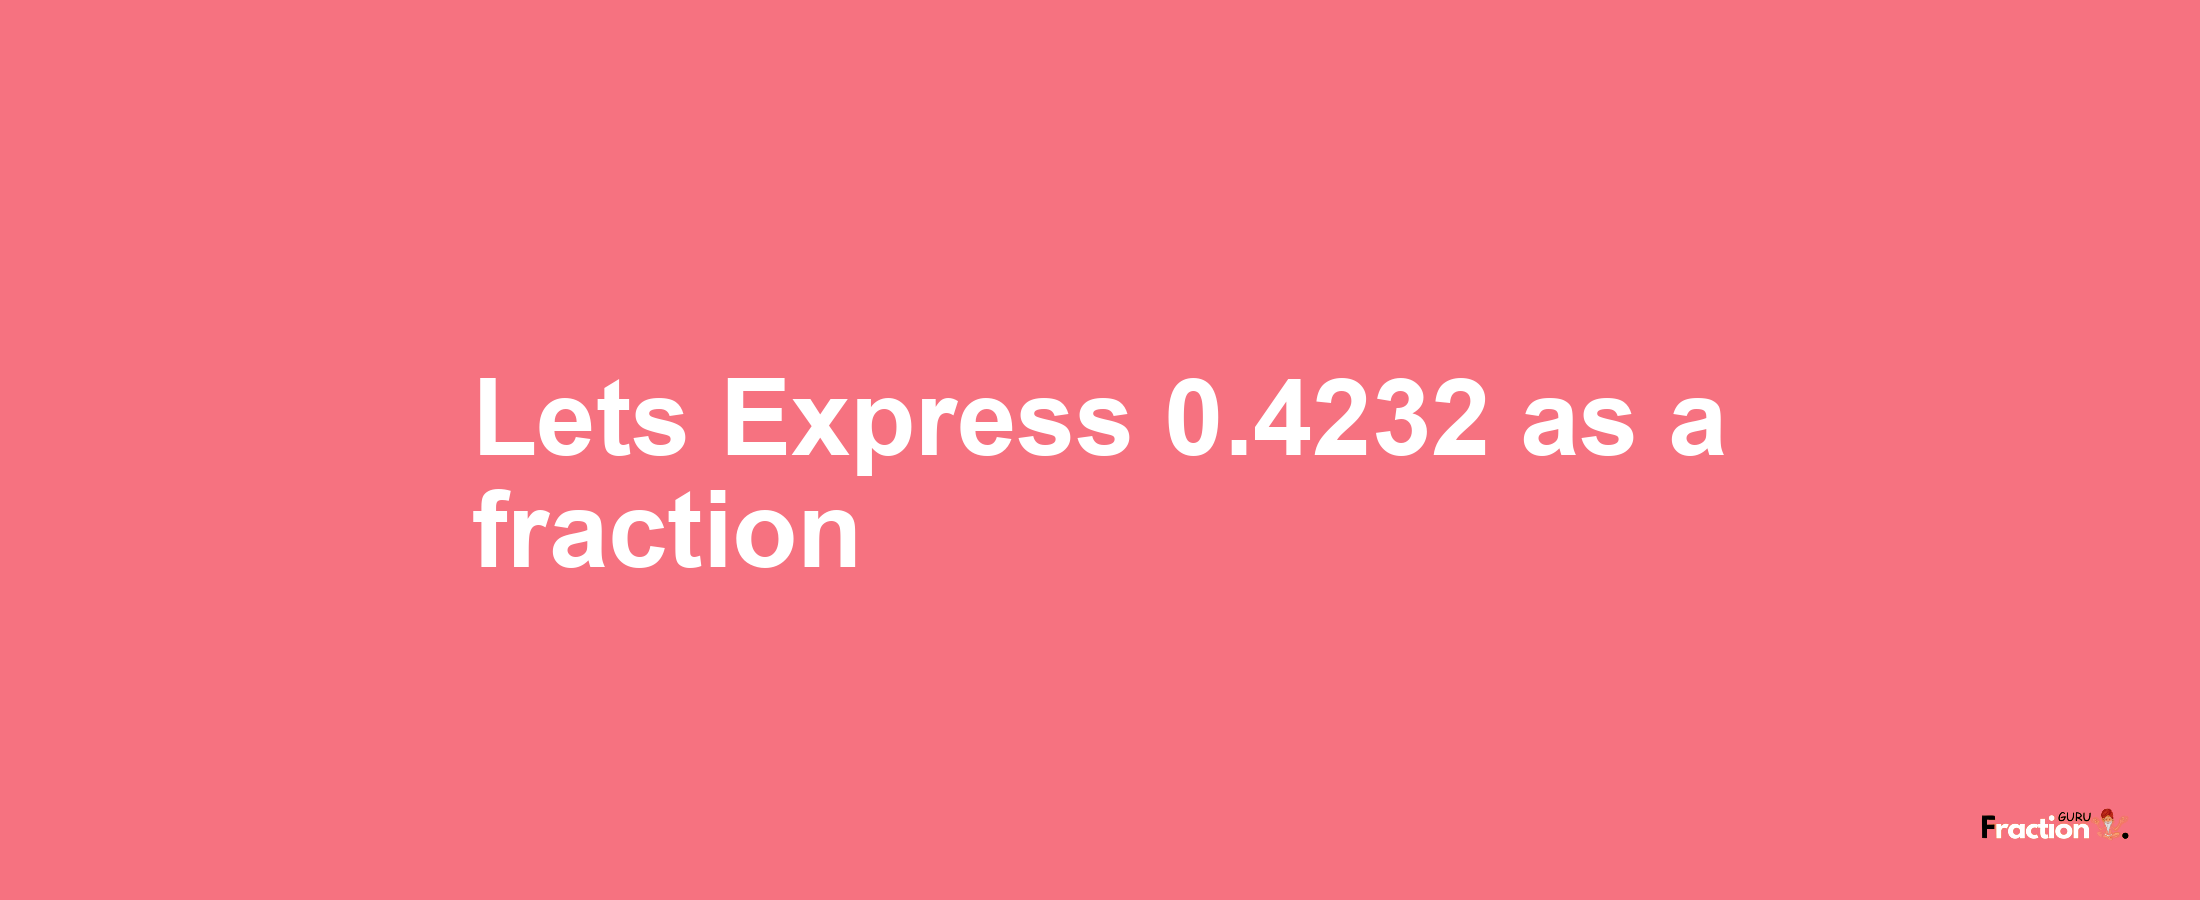 Lets Express 0.4232 as afraction